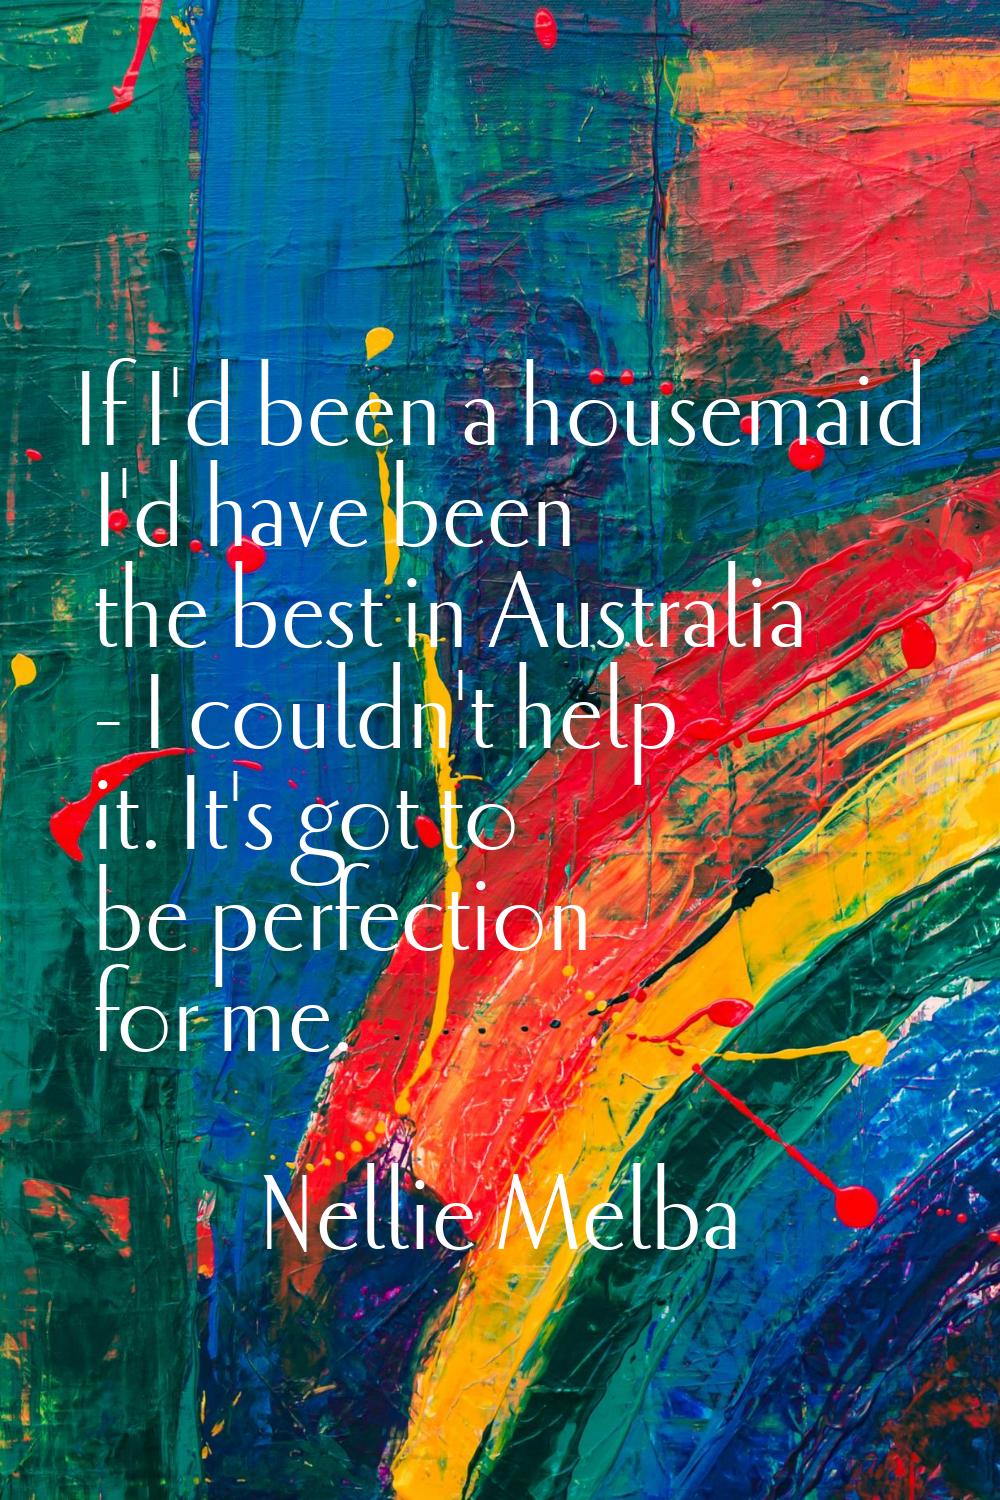 If I'd been a housemaid I'd have been the best in Australia - I couldn't help it. It's got to be pe